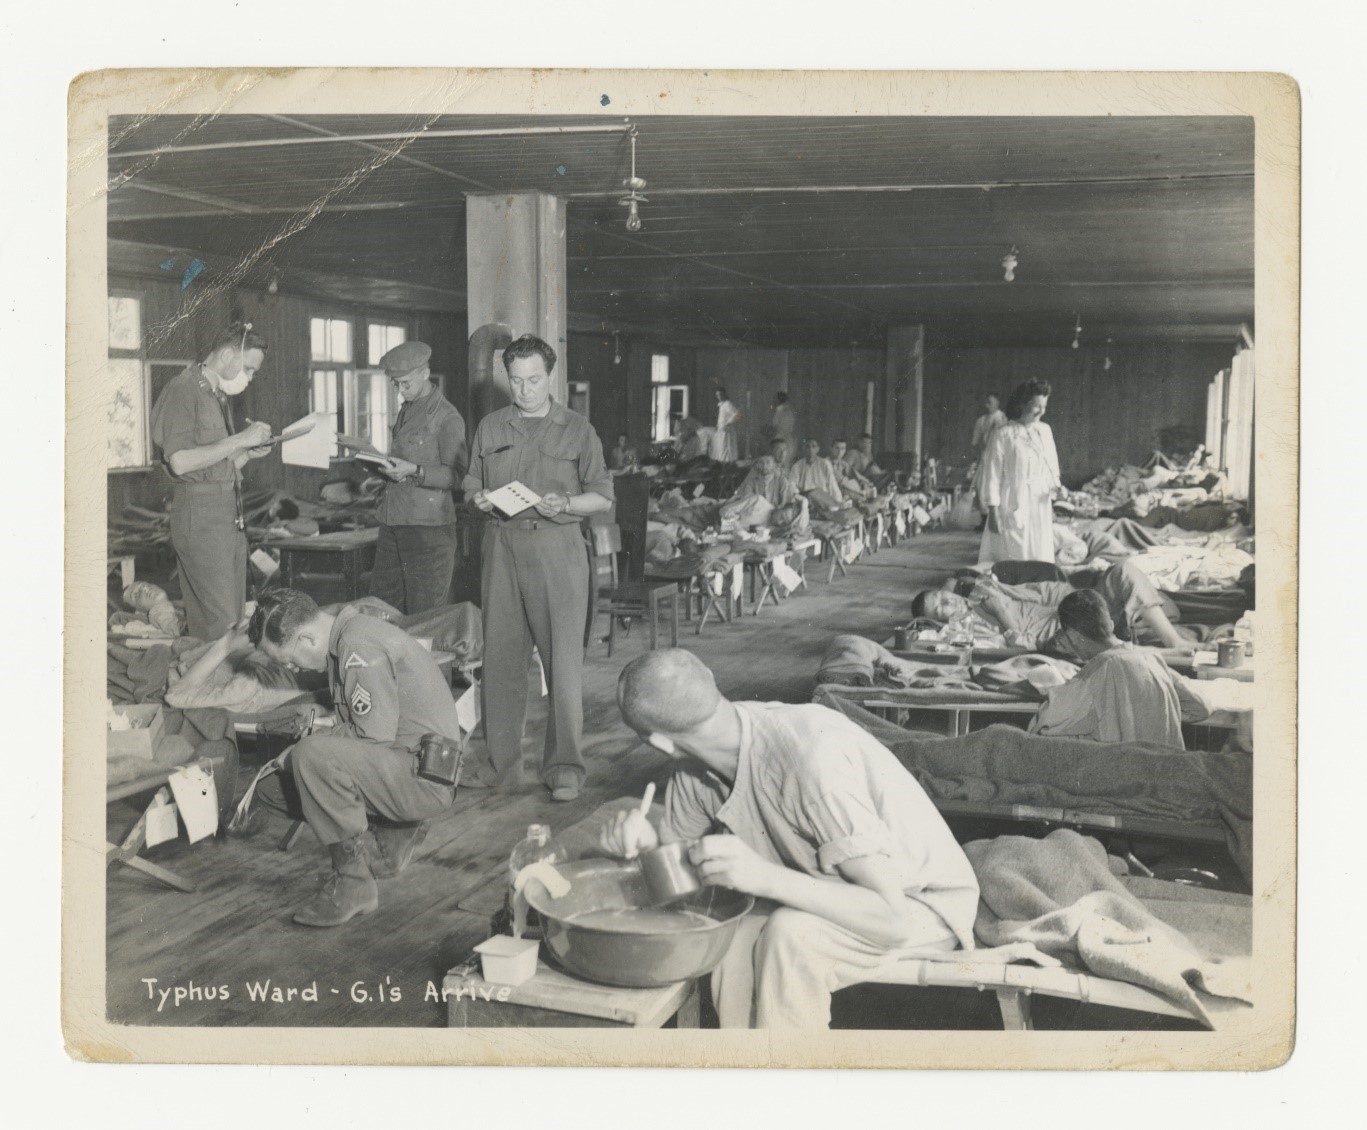 US soldiers caring for ill concentration camps prisoners